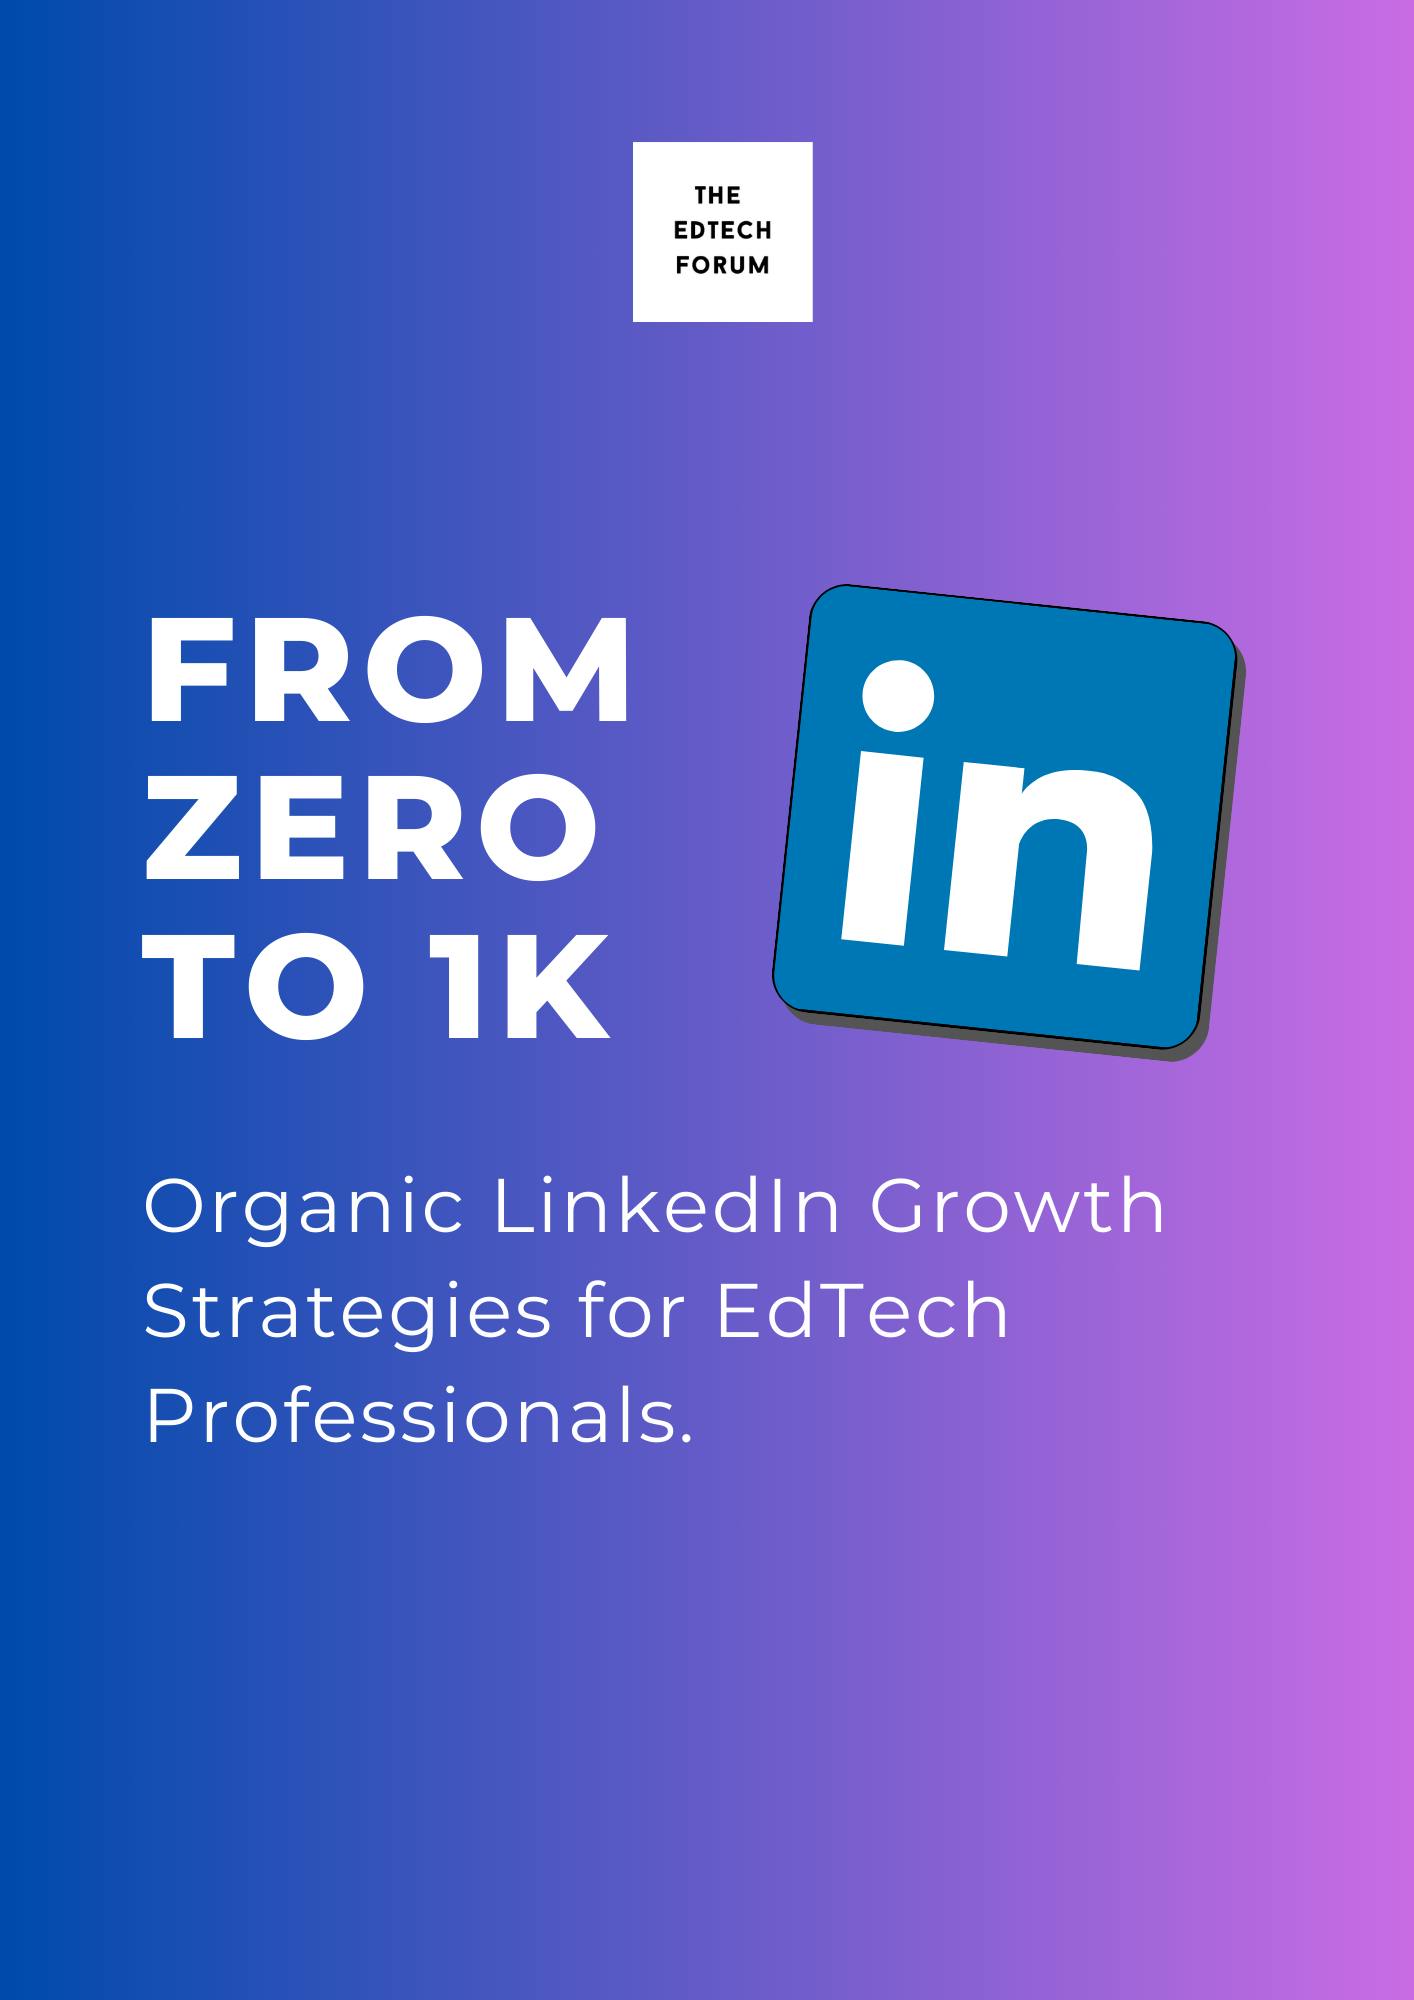 From Zero to 1K: Organic LinkedIn Growth Strategies for EdTech Professionals